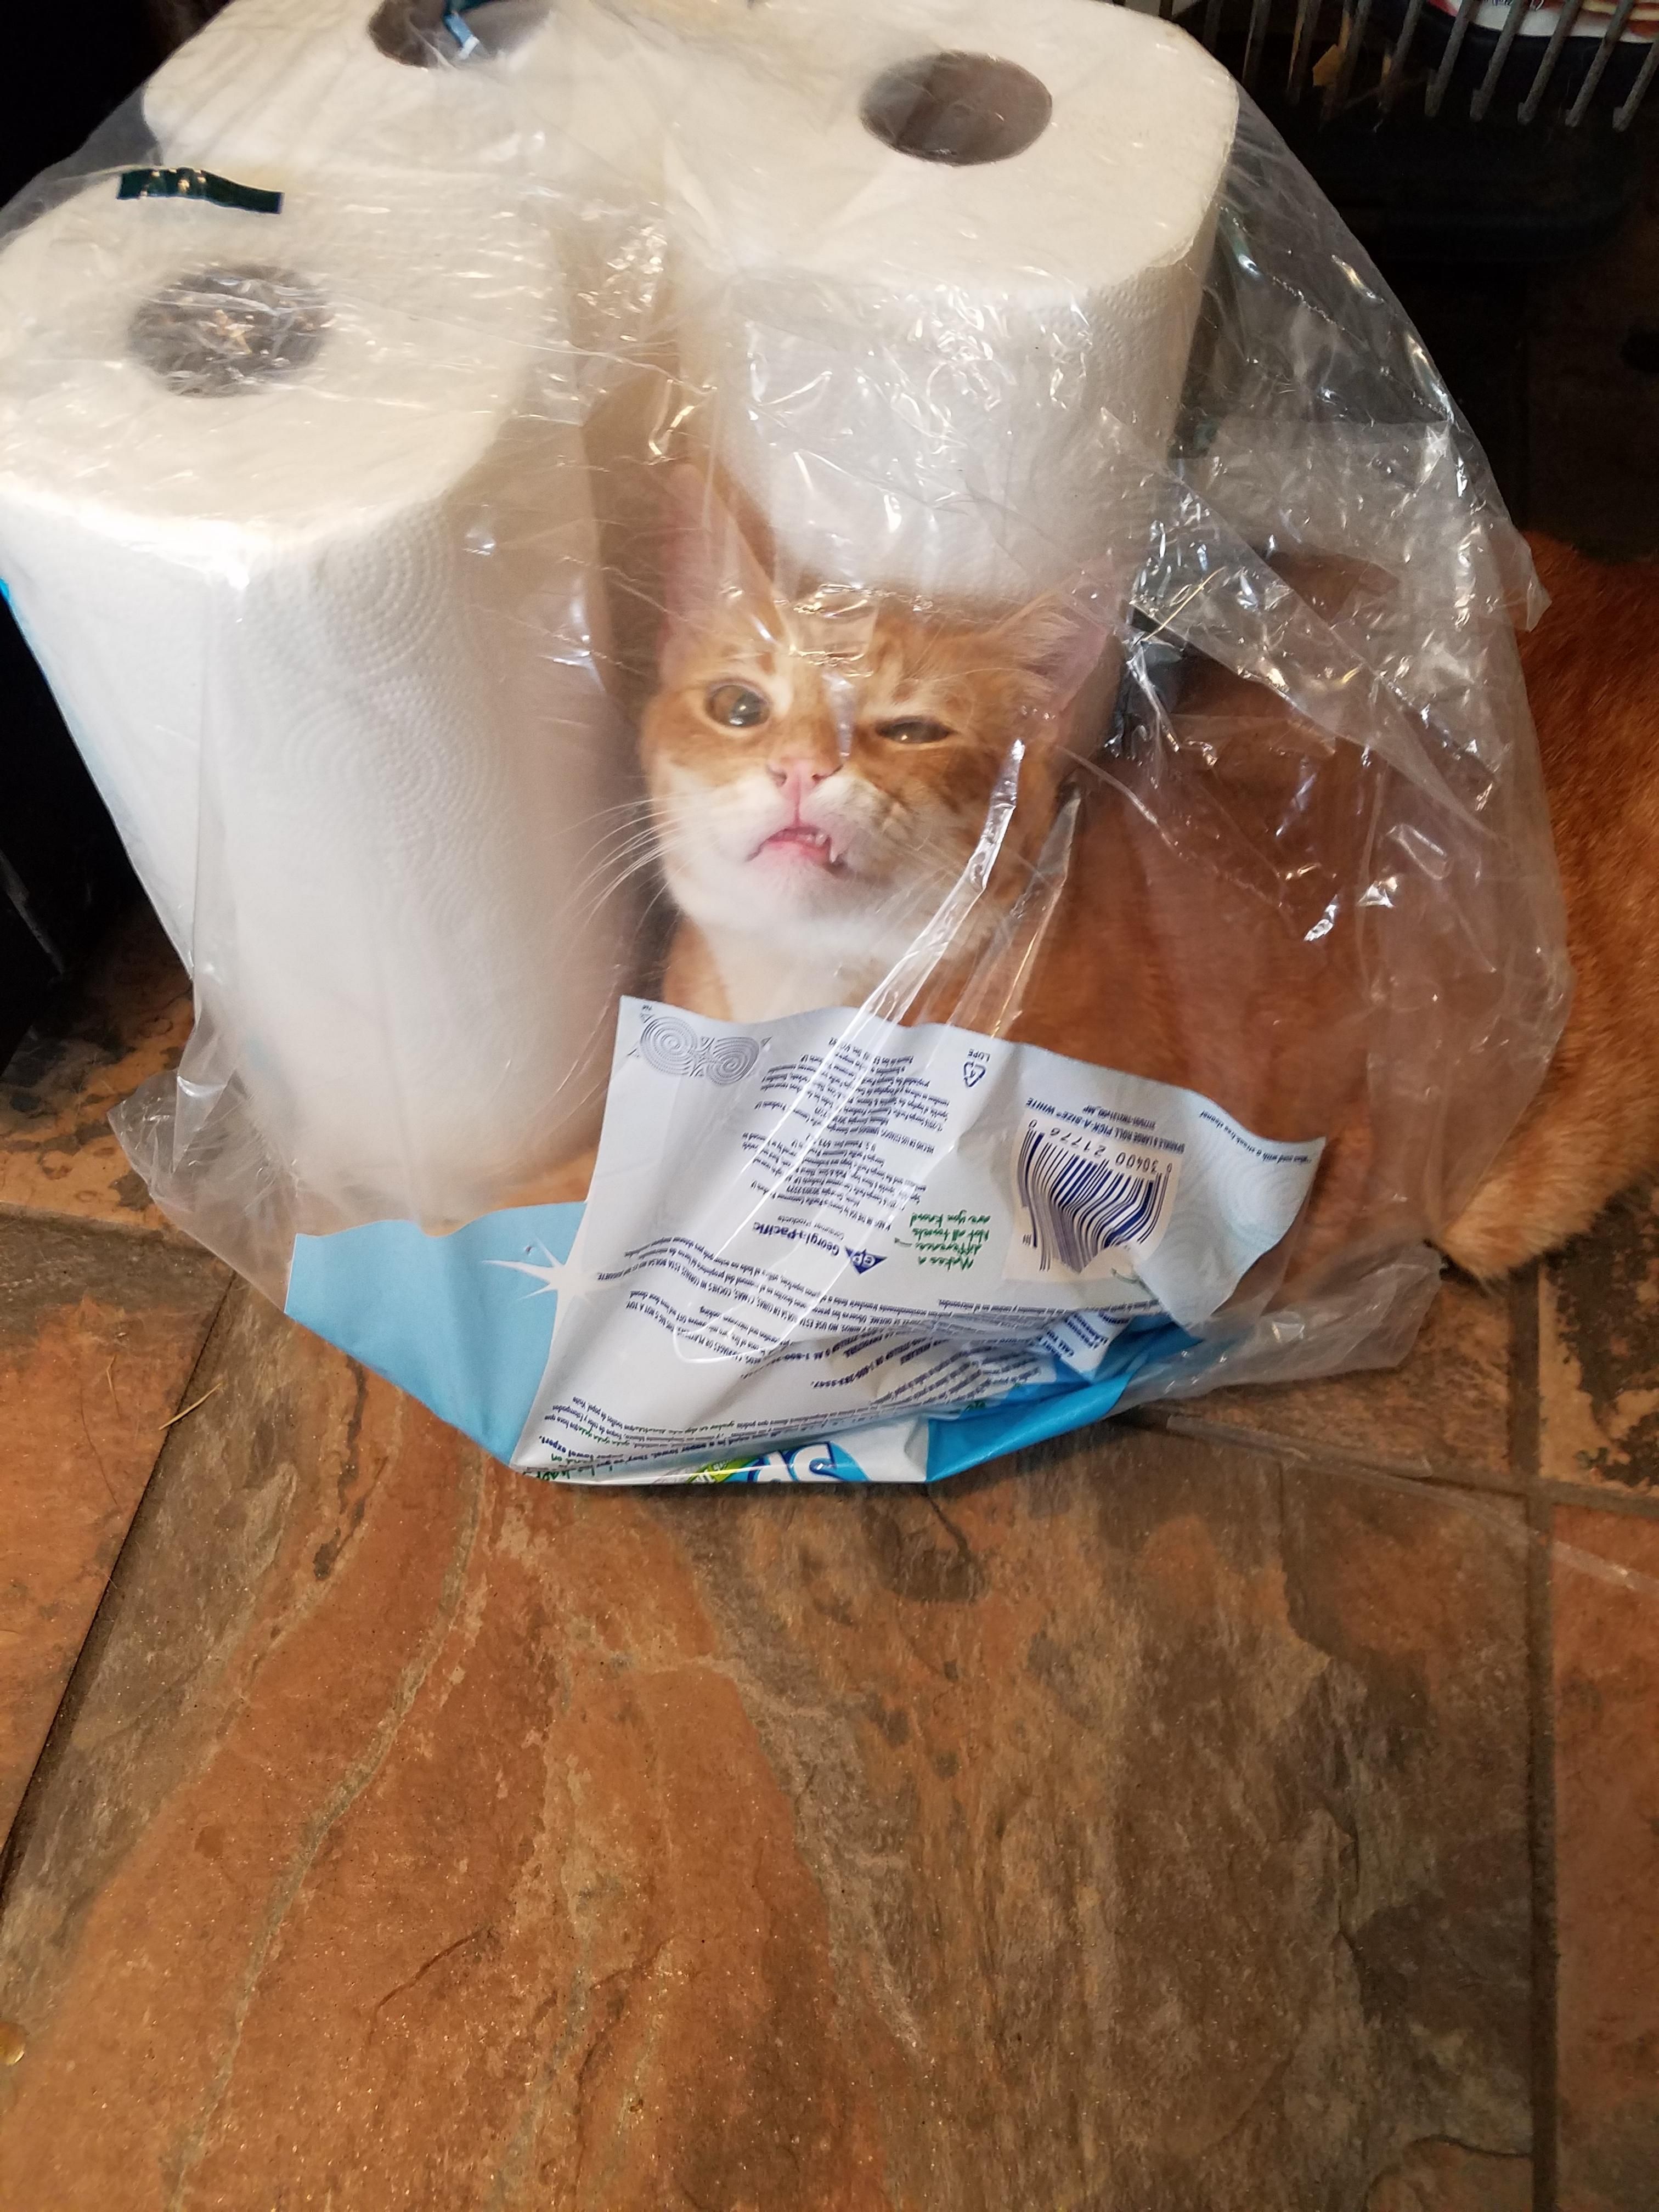 When you want to help put away the groceries, but there's a bag and you're a cat.